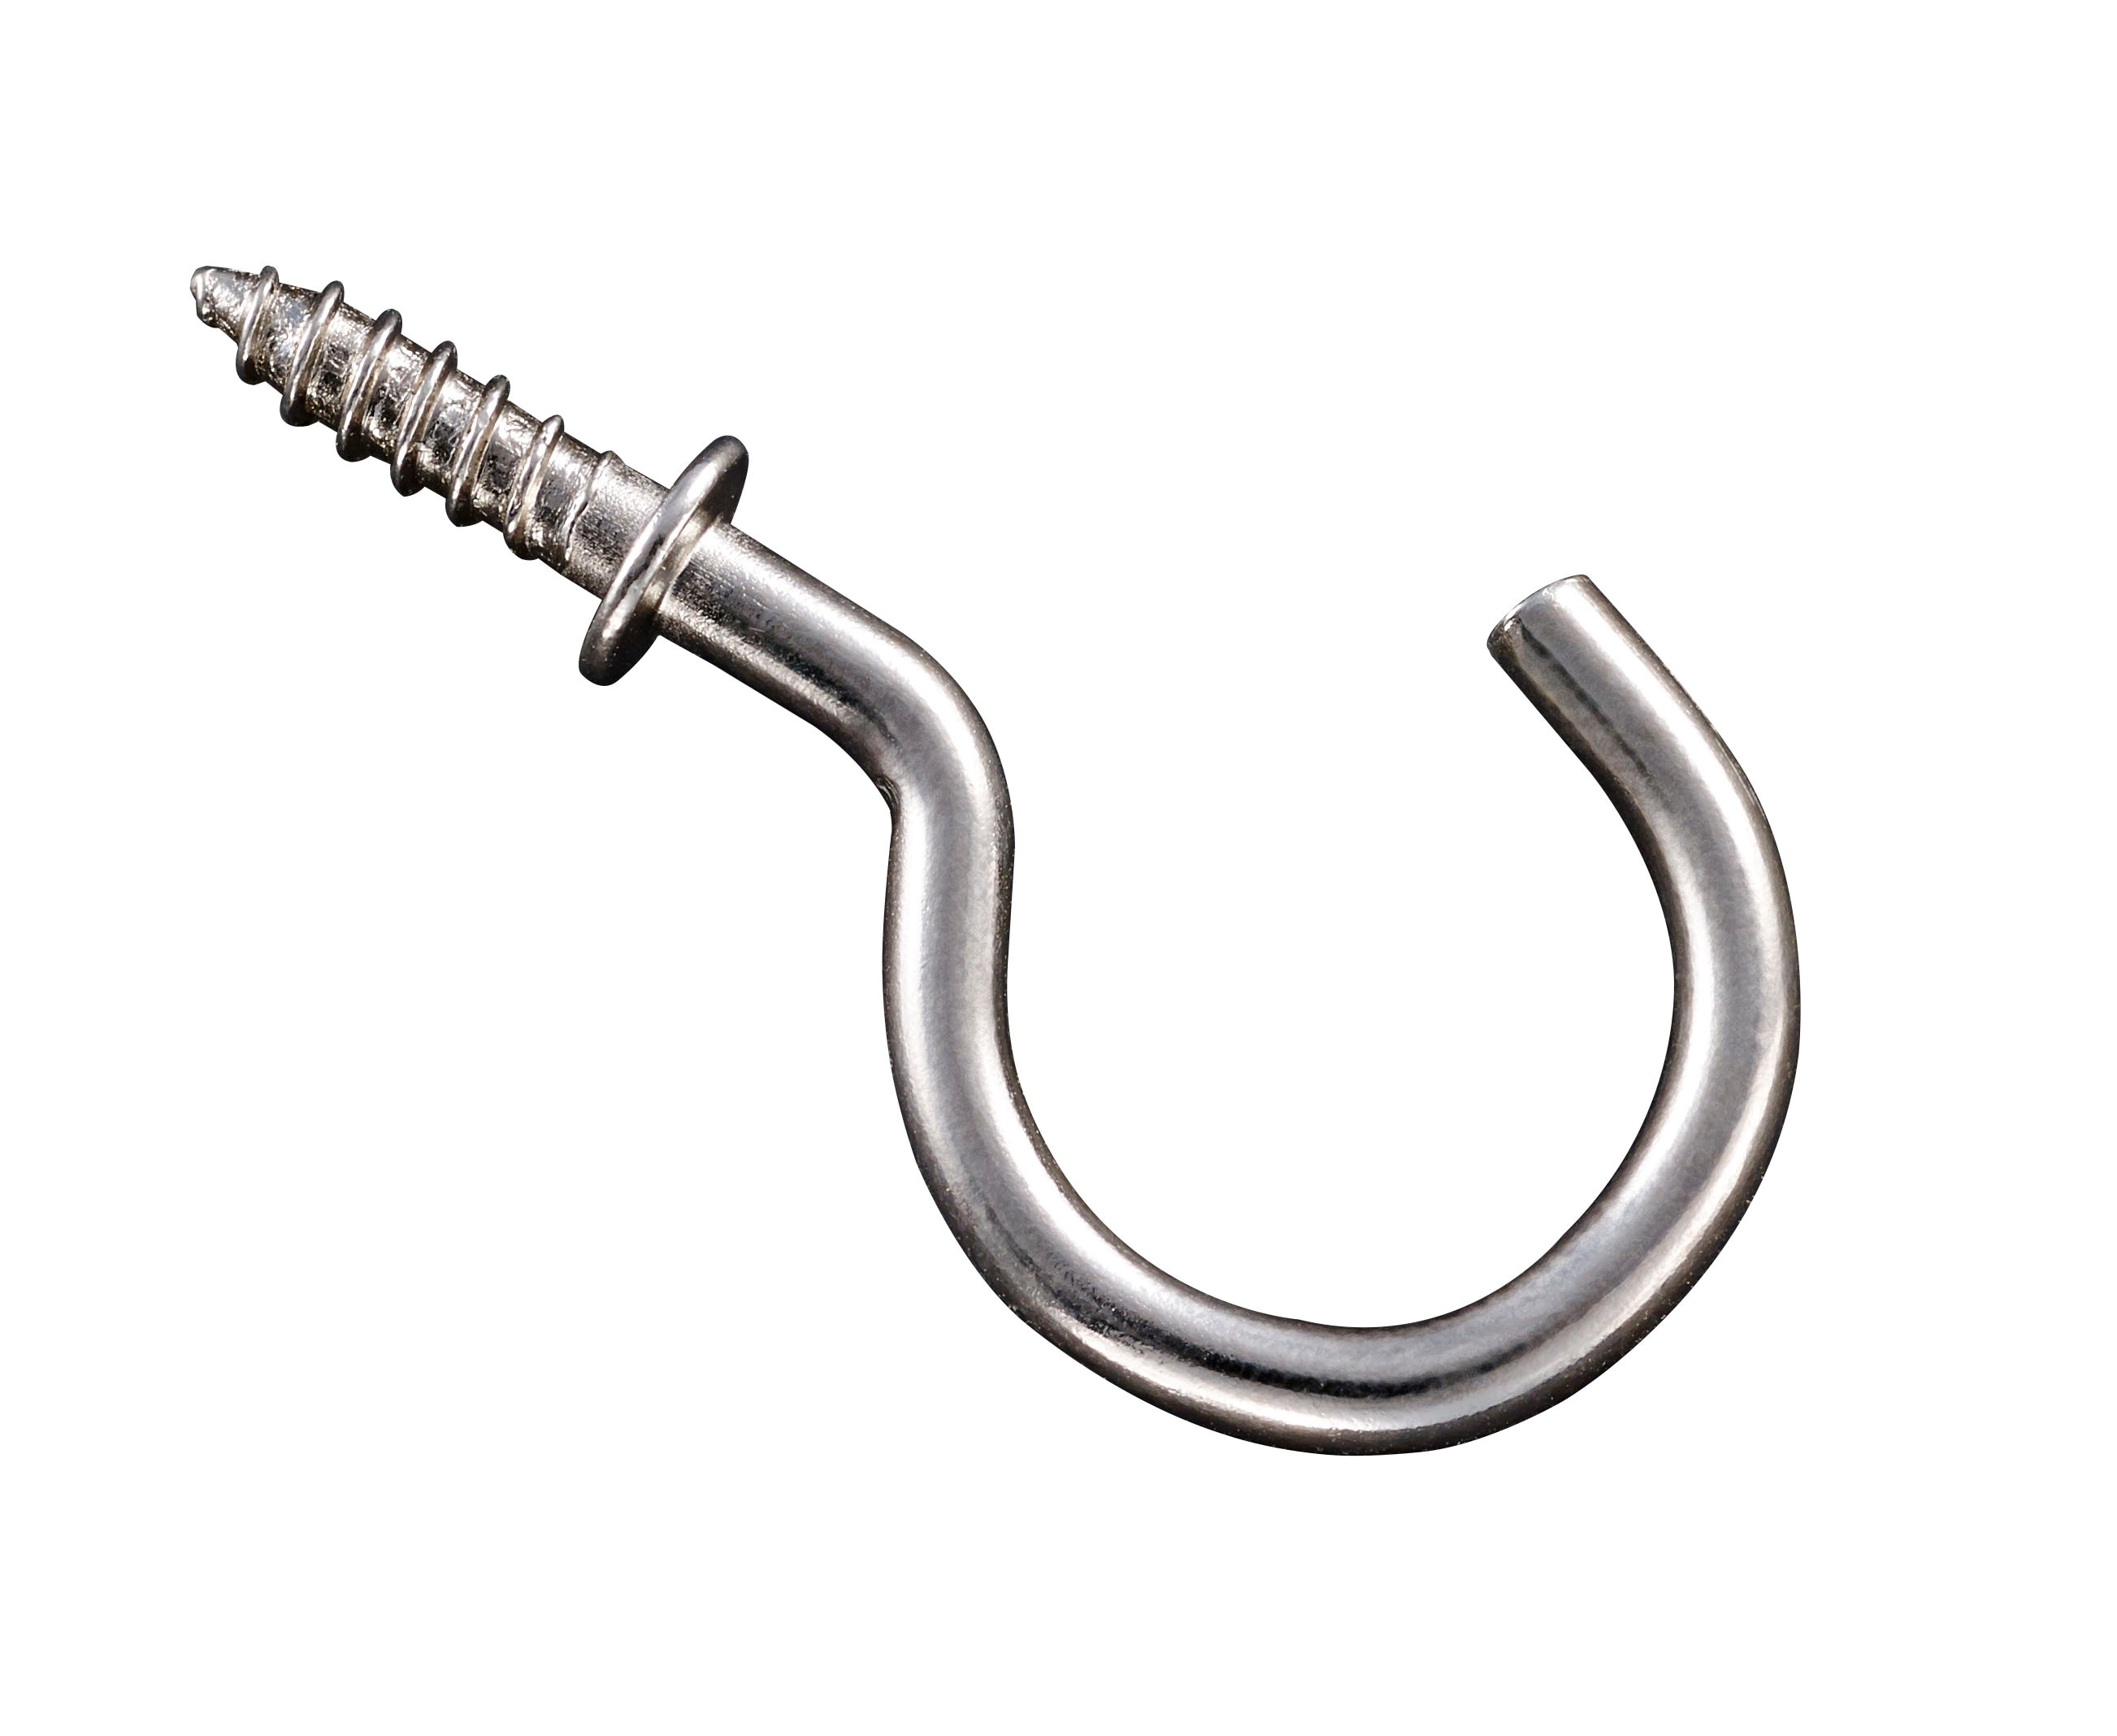 National Hardware 0.98-in Black Steel Cup Hook (30-Pack) in the